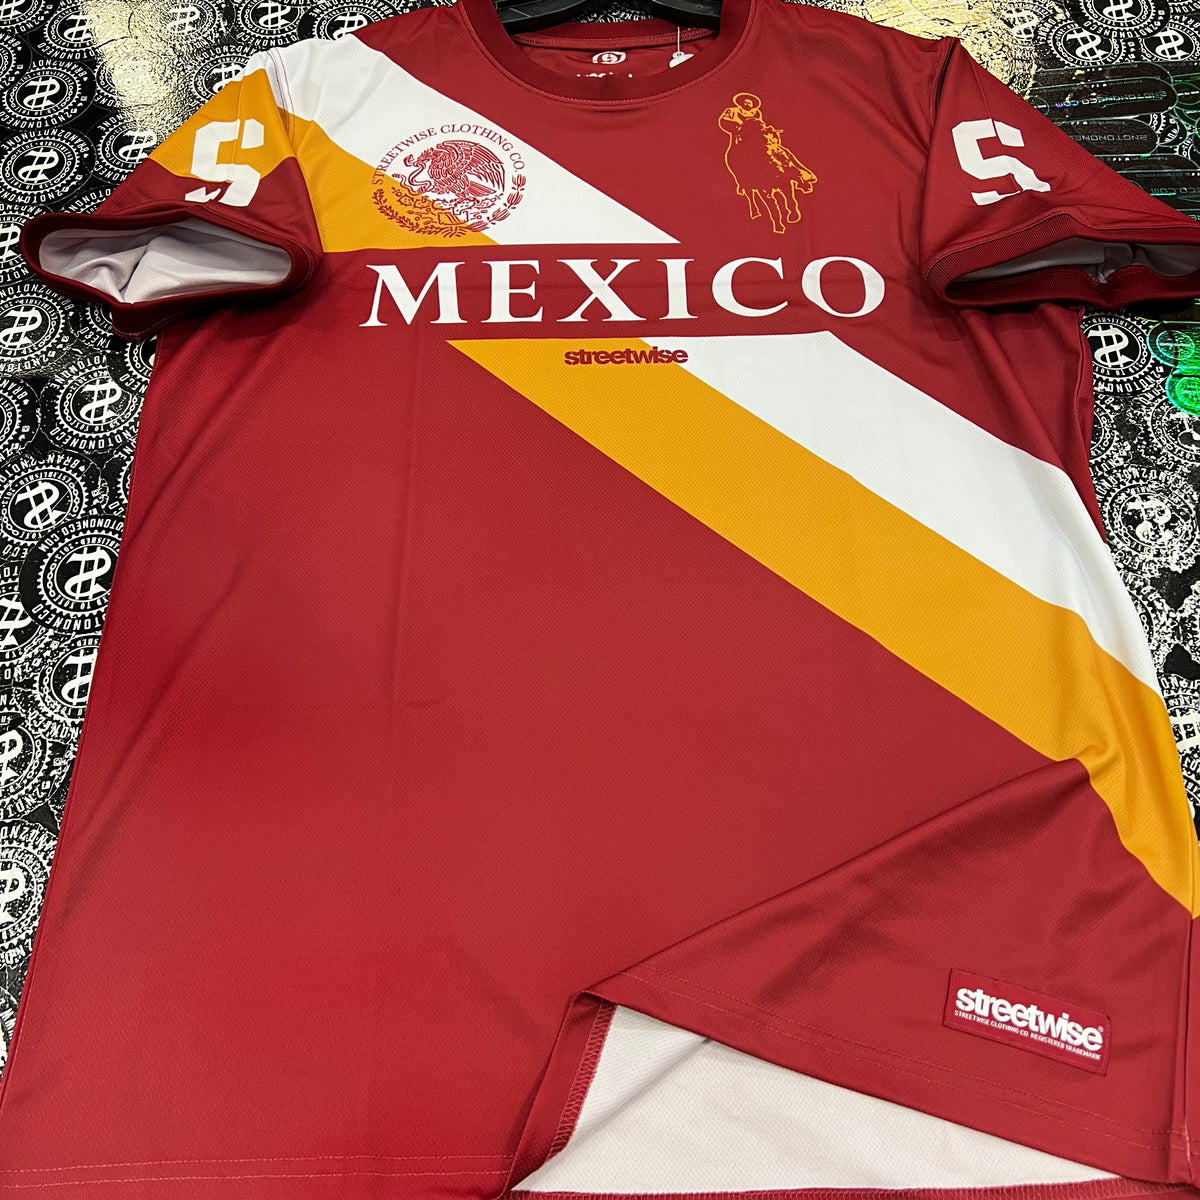 Streetwise Narco Polo Mexico soccer style Jersey in color Burgundy